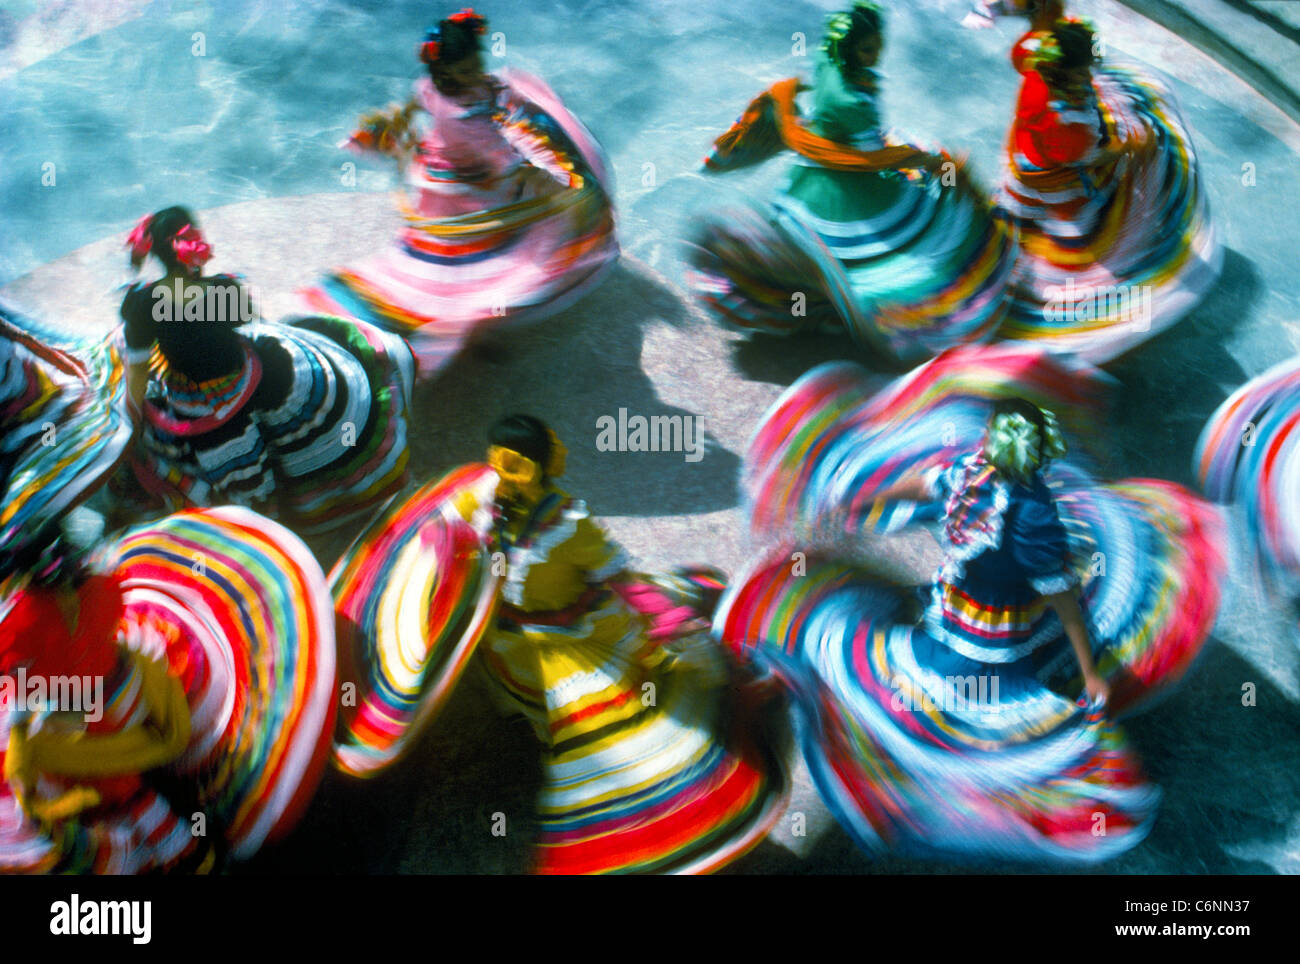 An overhead view shows off the colorful traditional dresses of twirling folkloric dancers who often entertain tourists in Mexico, North America. Stock Photo